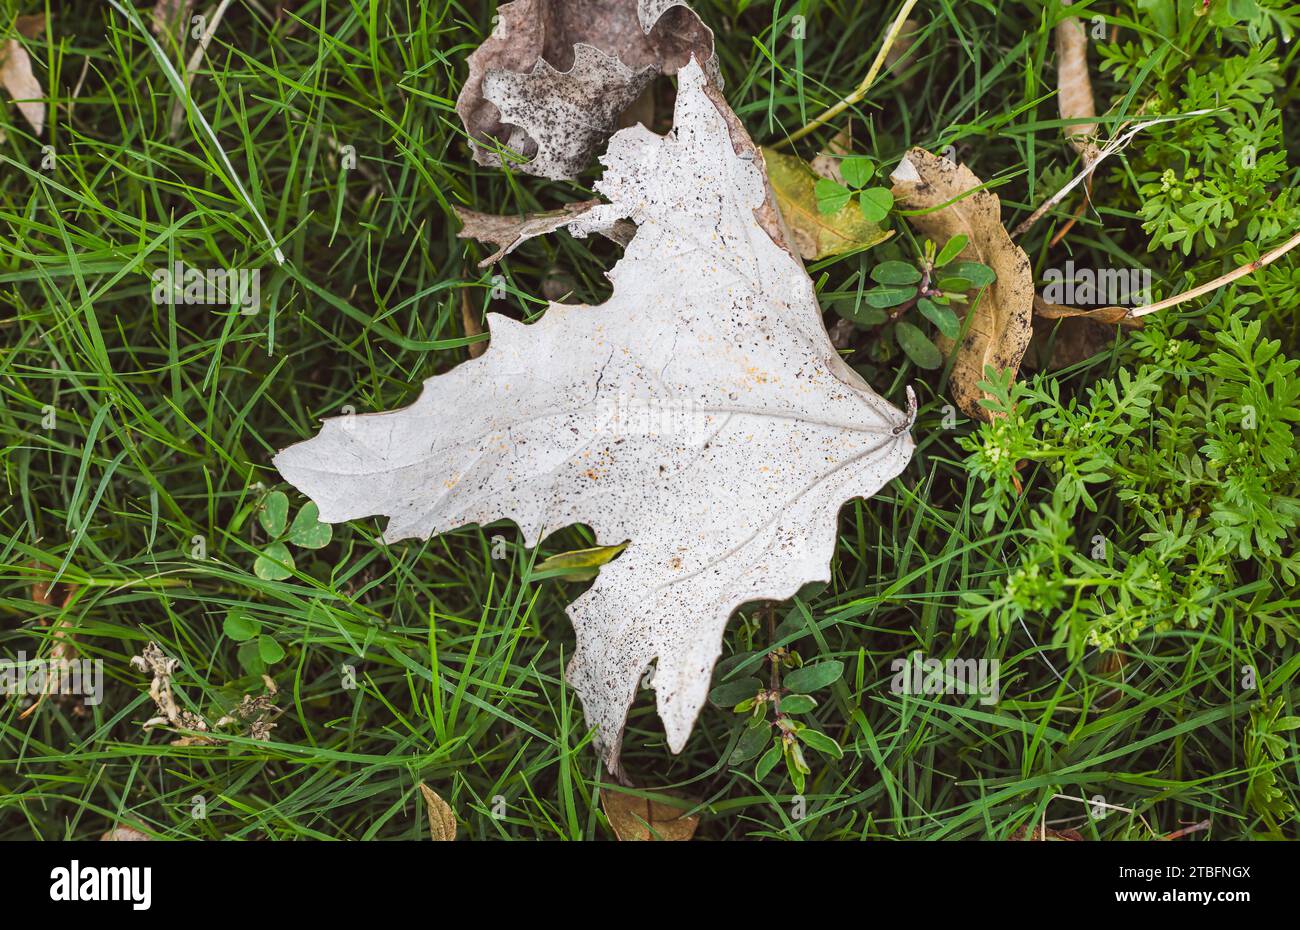 dry leaf on a background of green grass Stock Photo